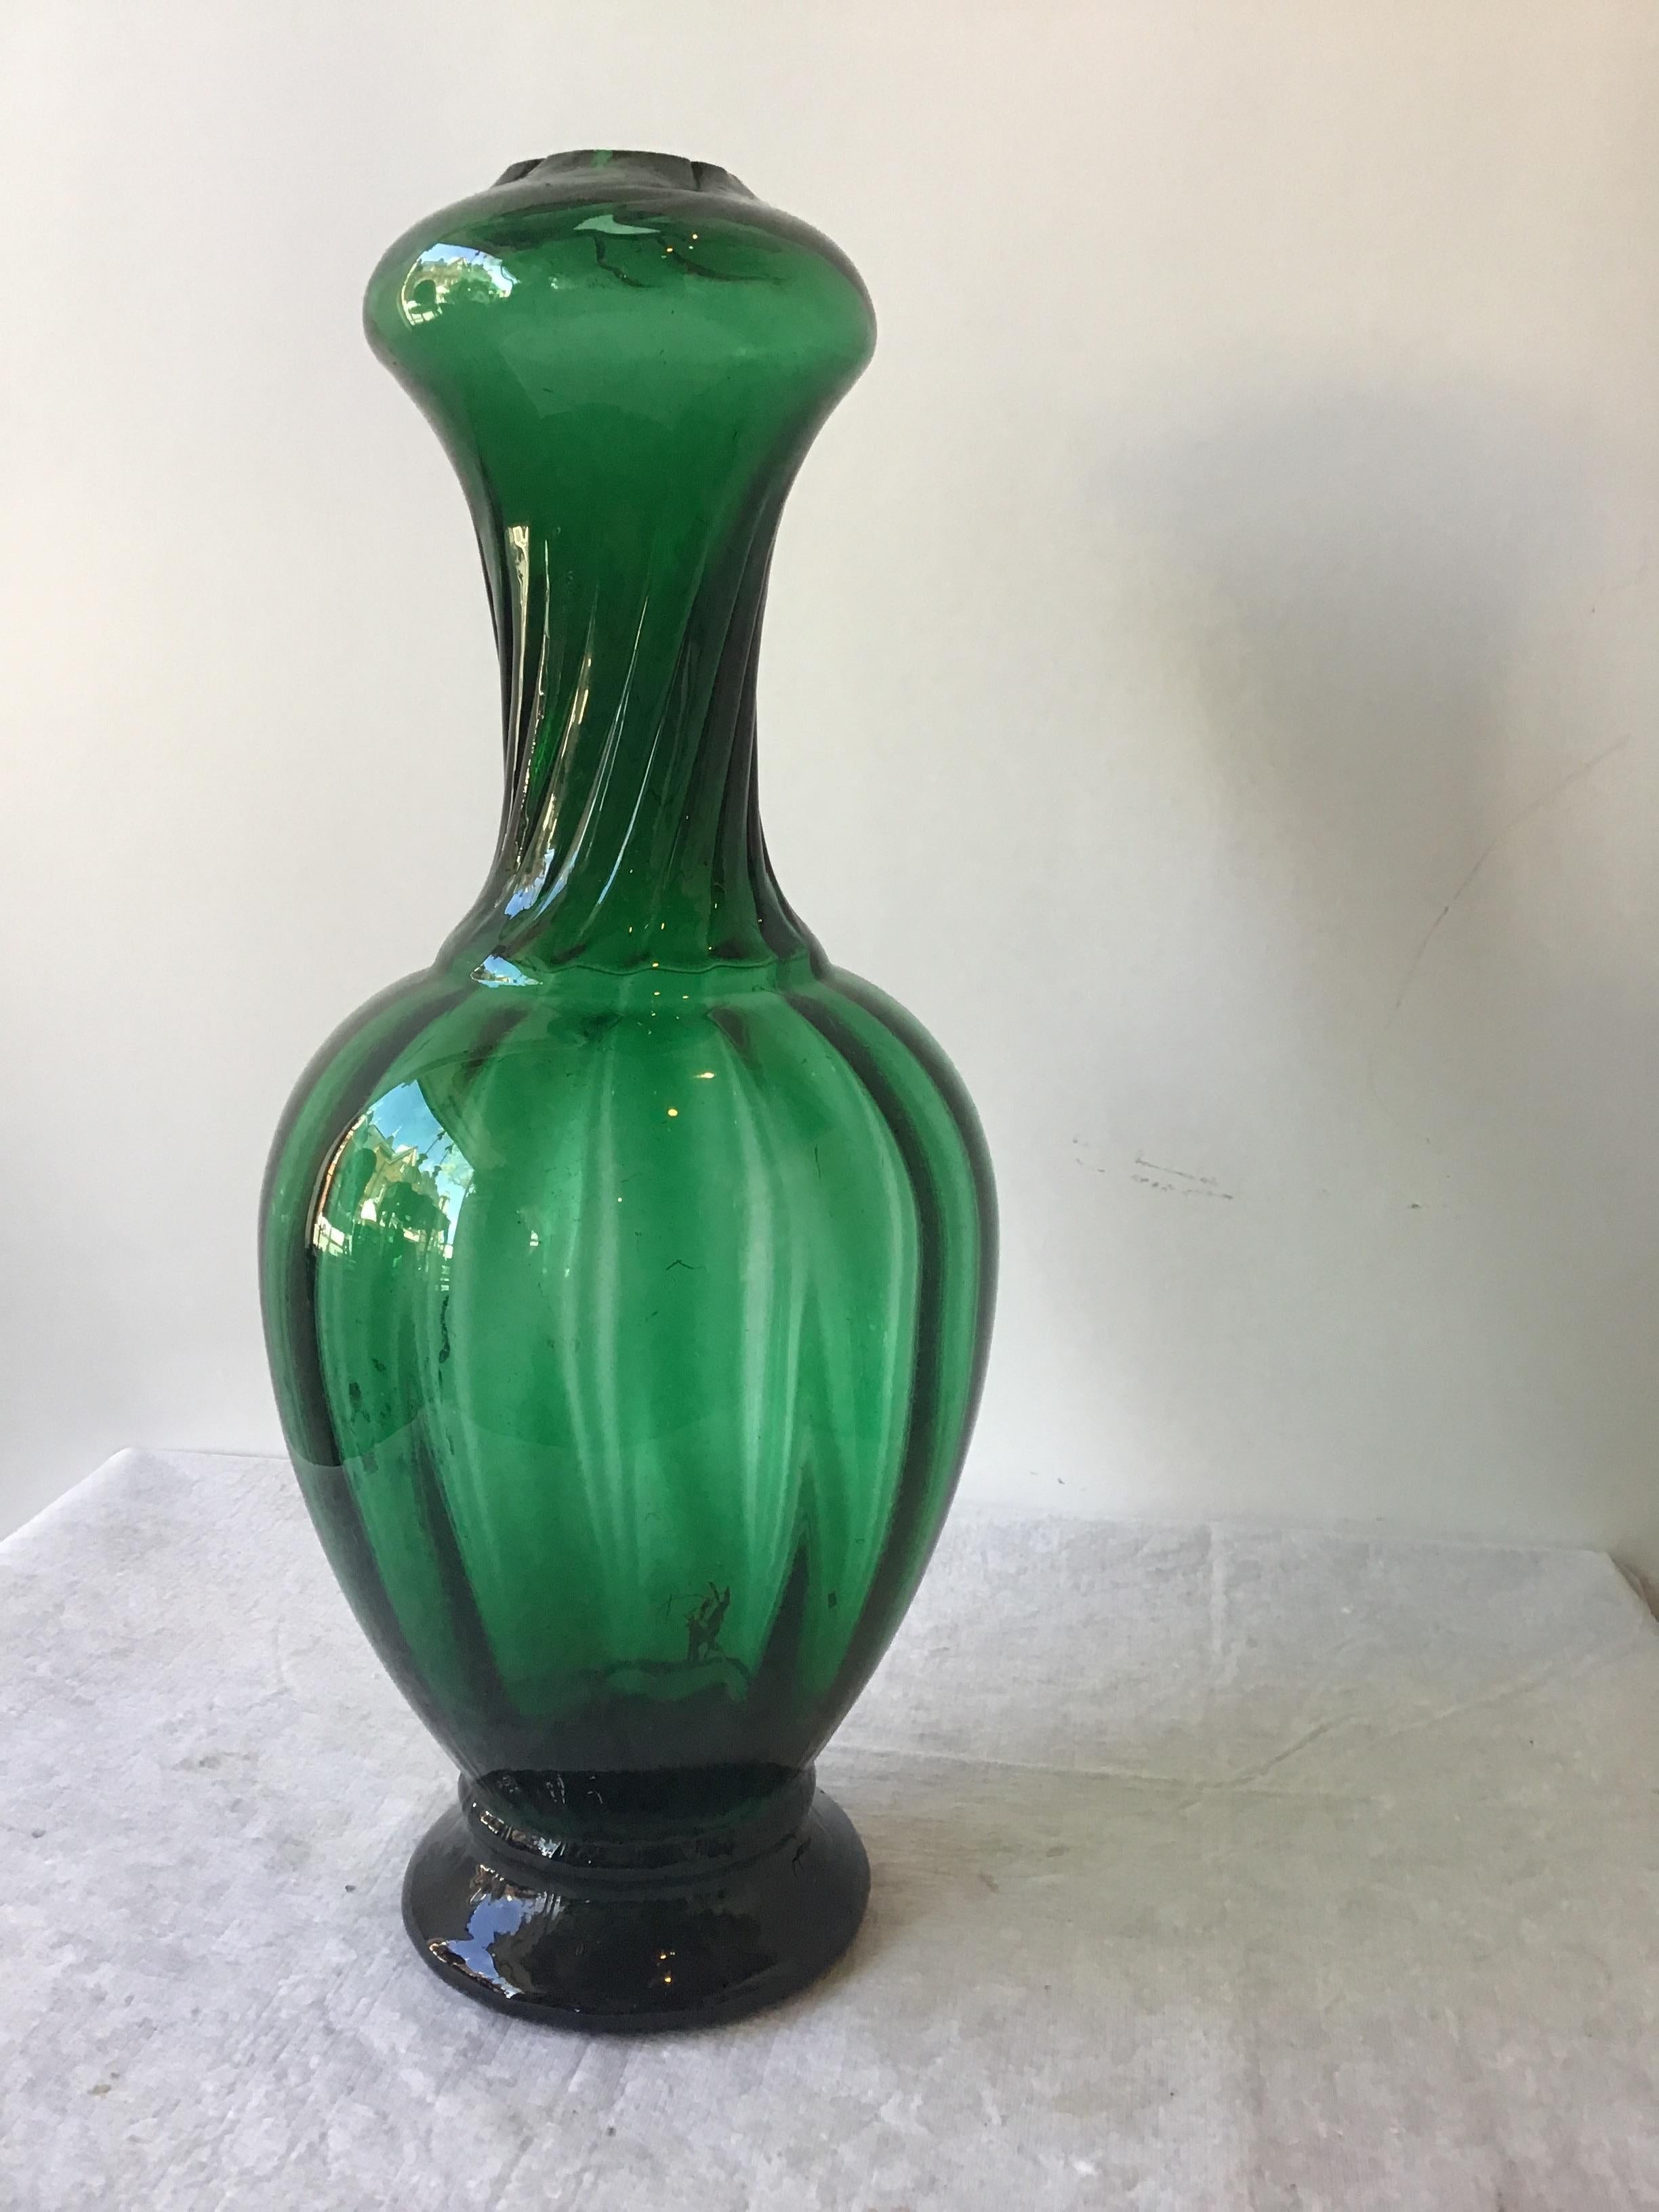 1960s green Murano lamp Body by Balboa.
Lamp body needs all parts in order to be functioning light.